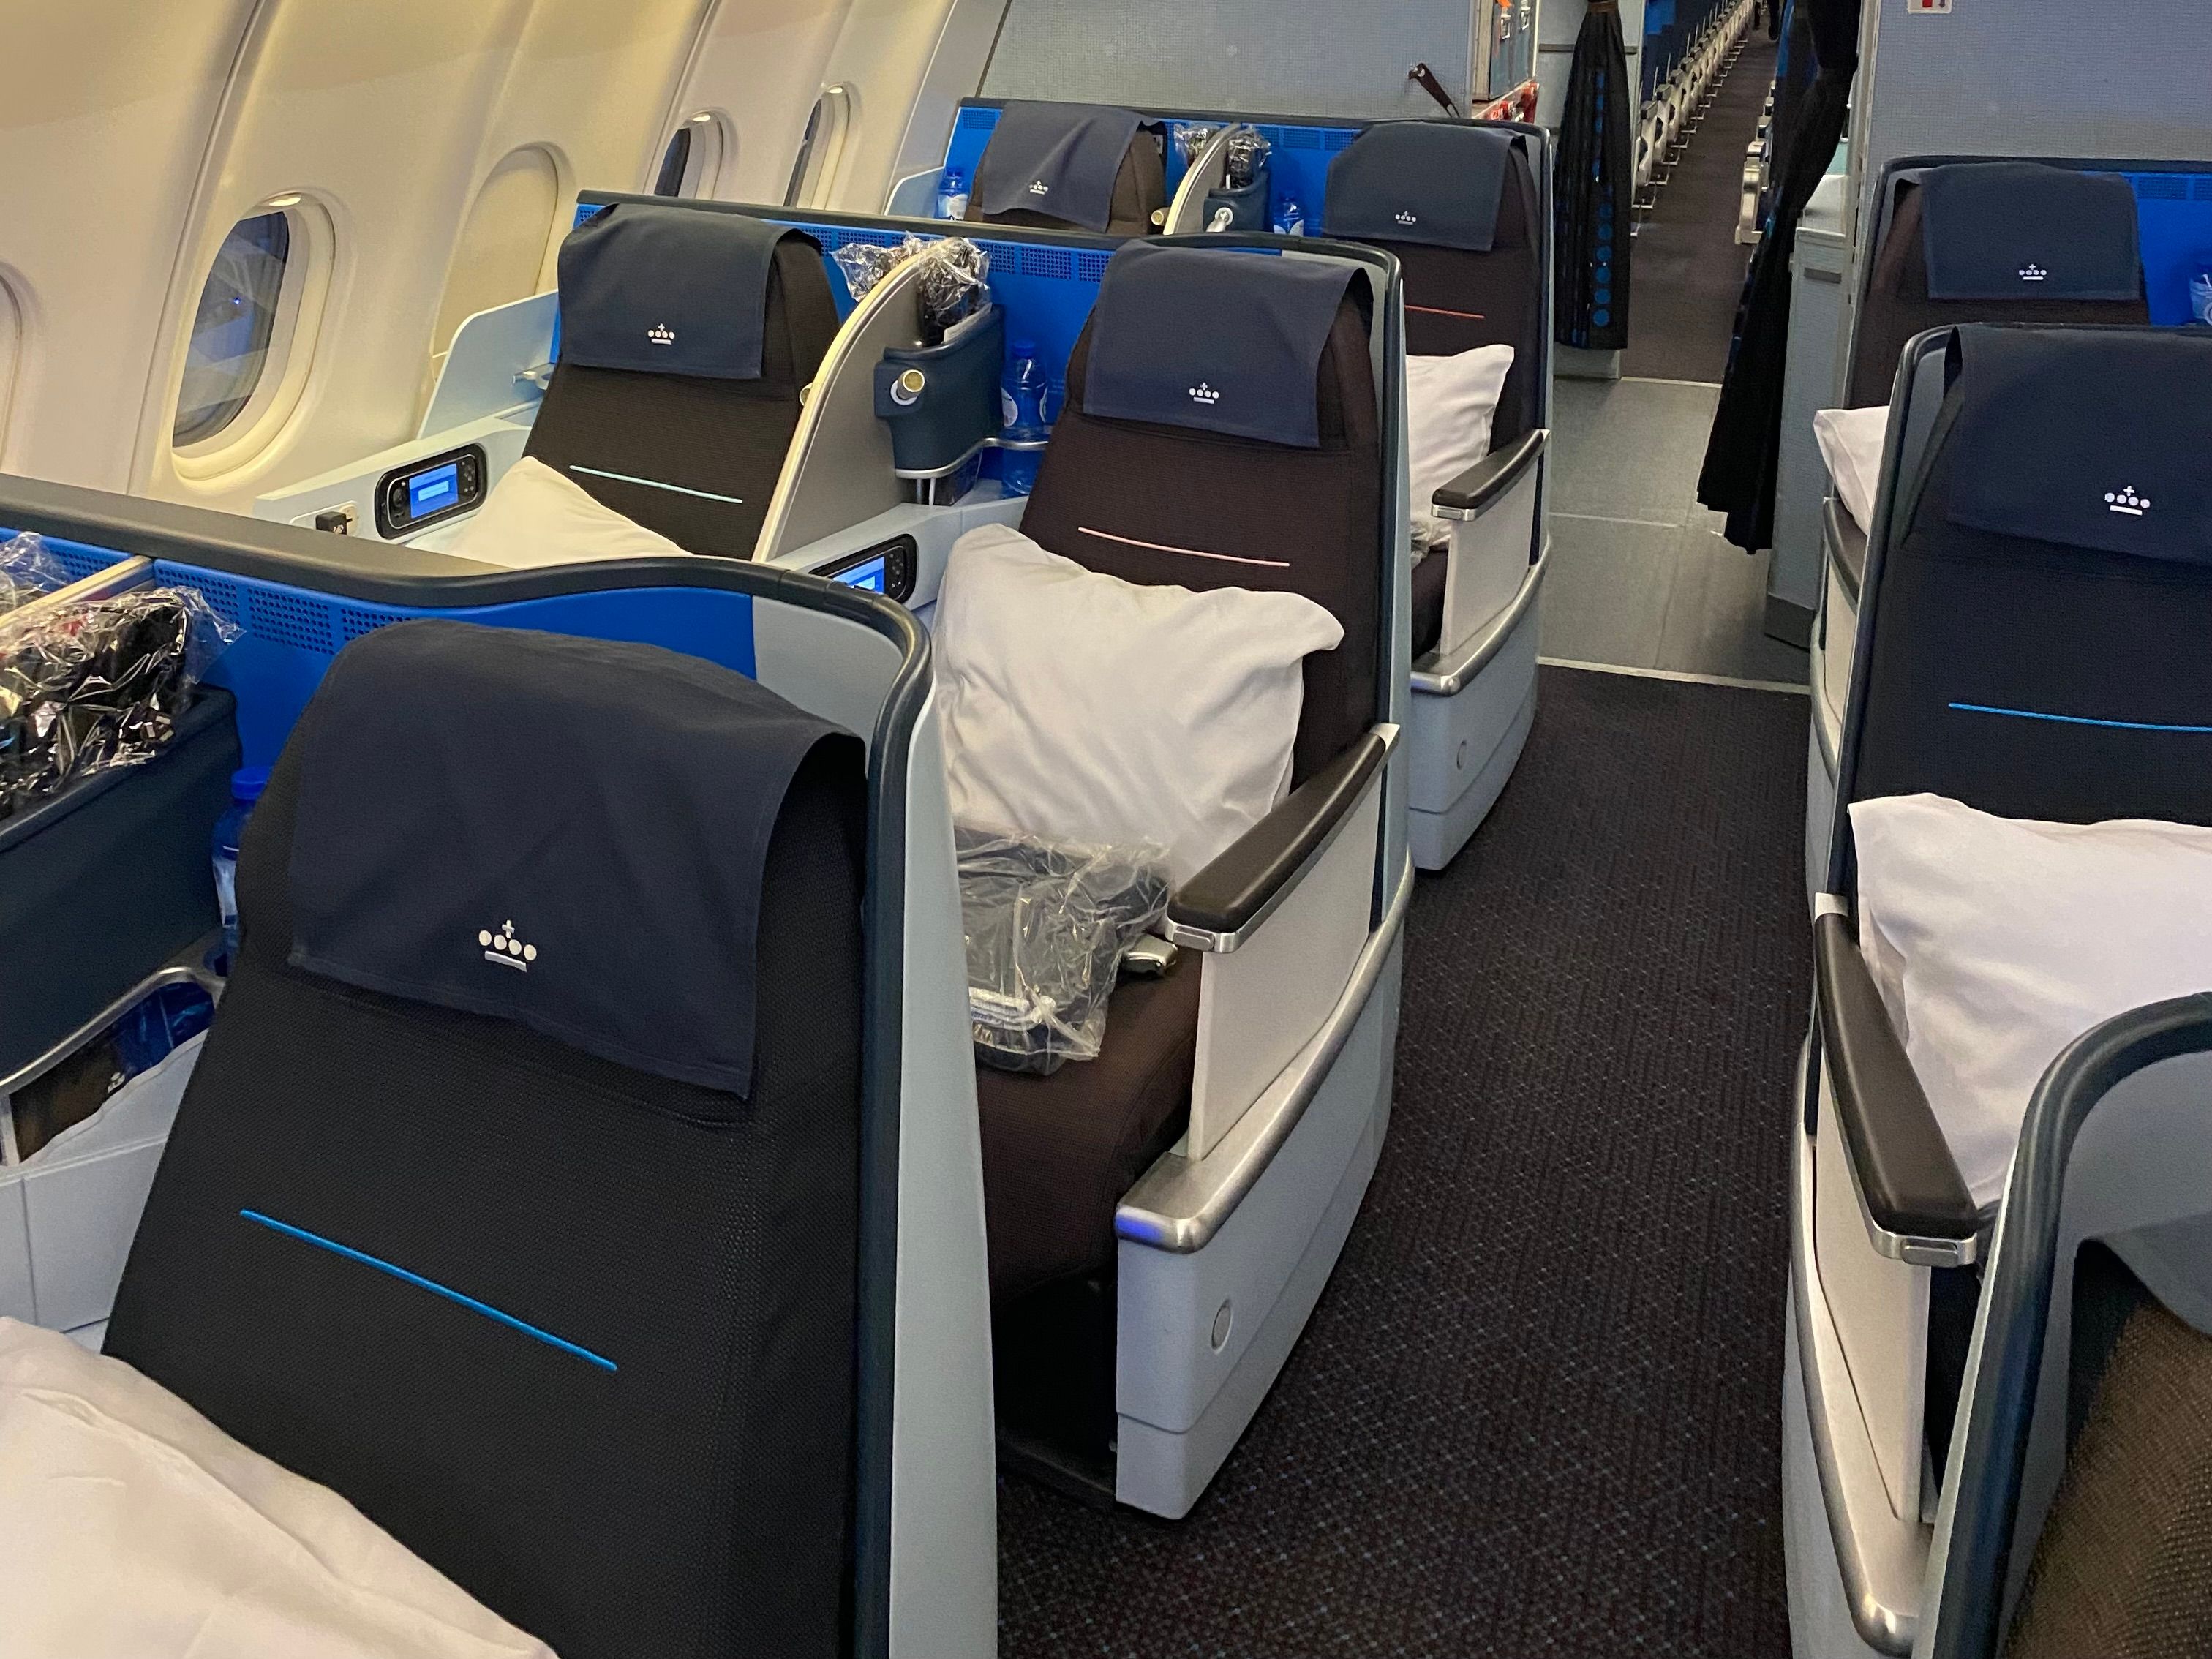 KLM World Business Cabin - Airbus A330-200